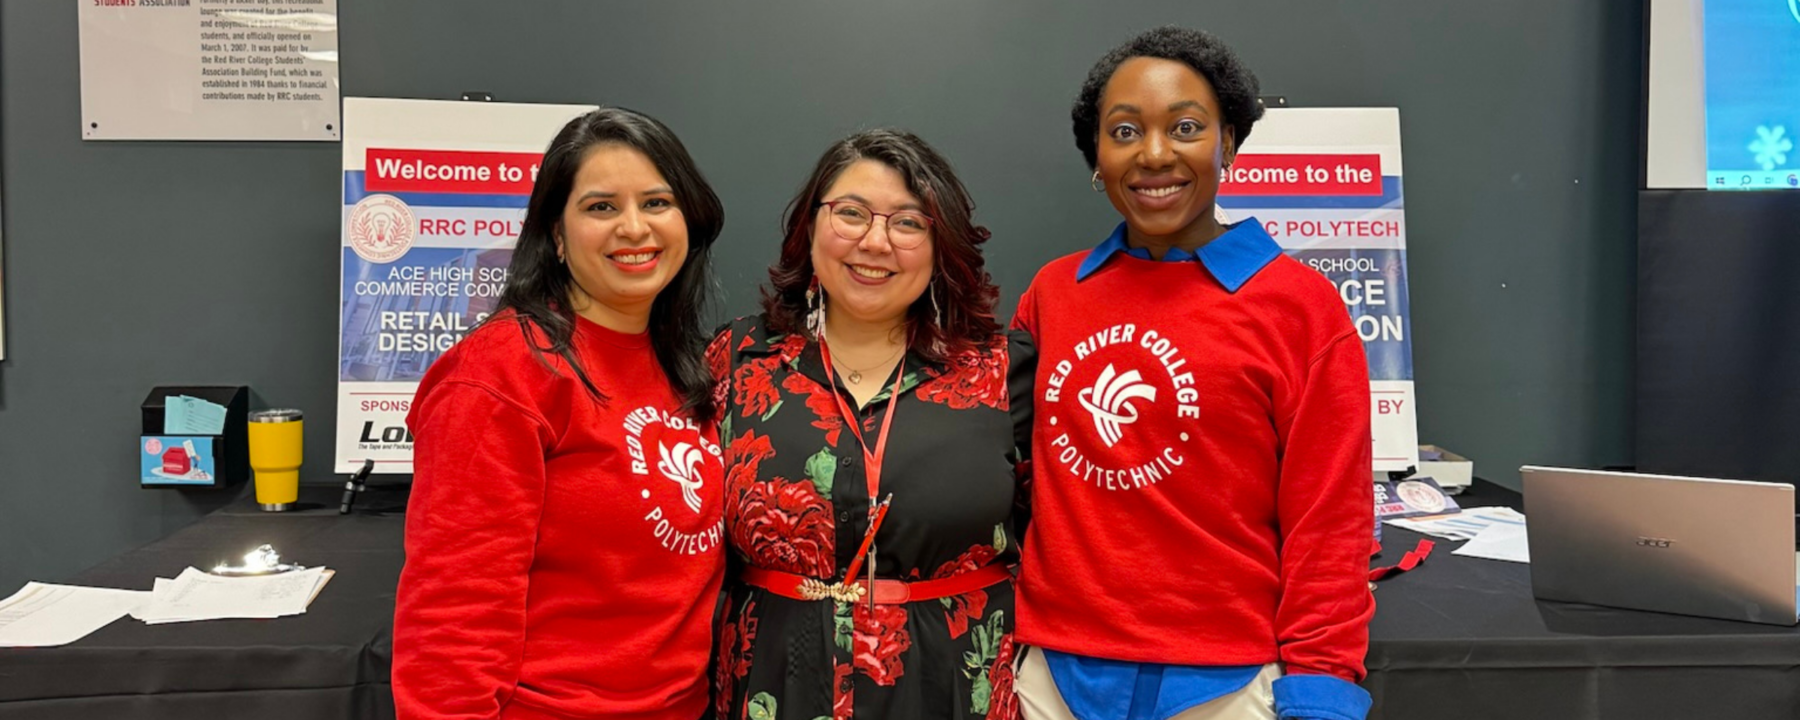 Three female Teacher Education students stand shoulder to shoulder. Two of them wear bright red sweaters, the one in the middle wears a black dress with red flowers.